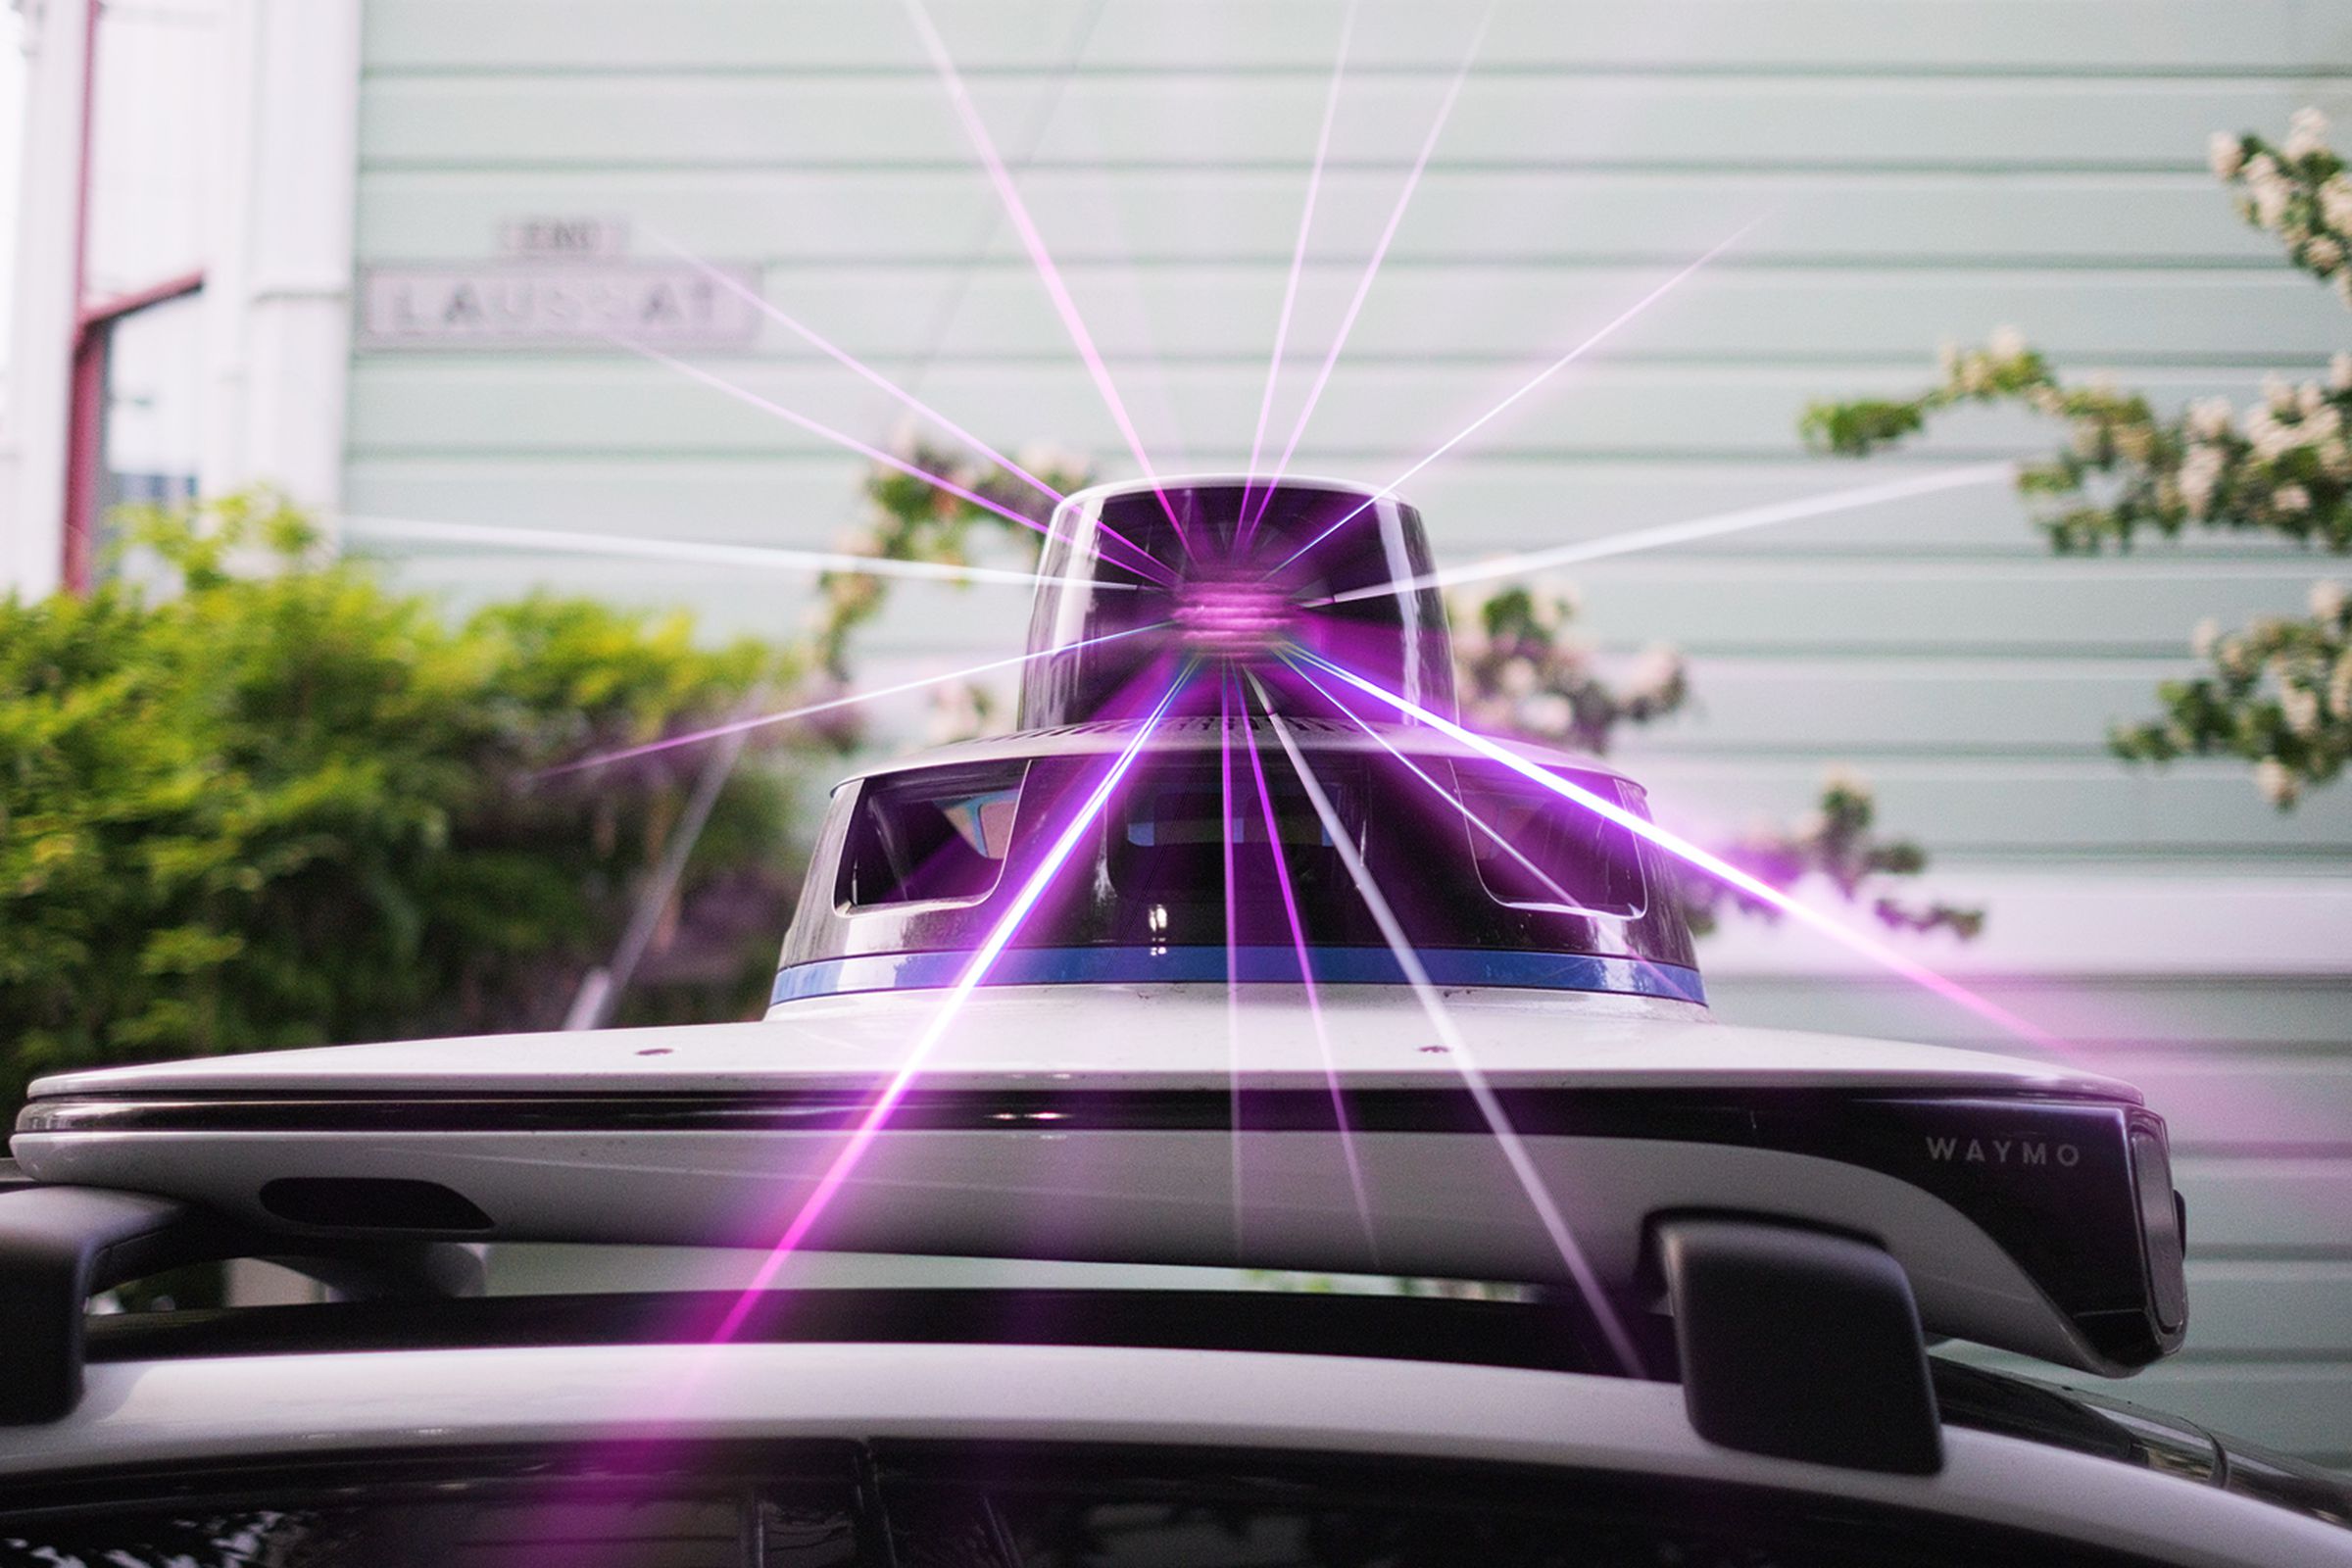 Close up of Lidar system on top of an autonomous vehicle with purple laser emitting from it.